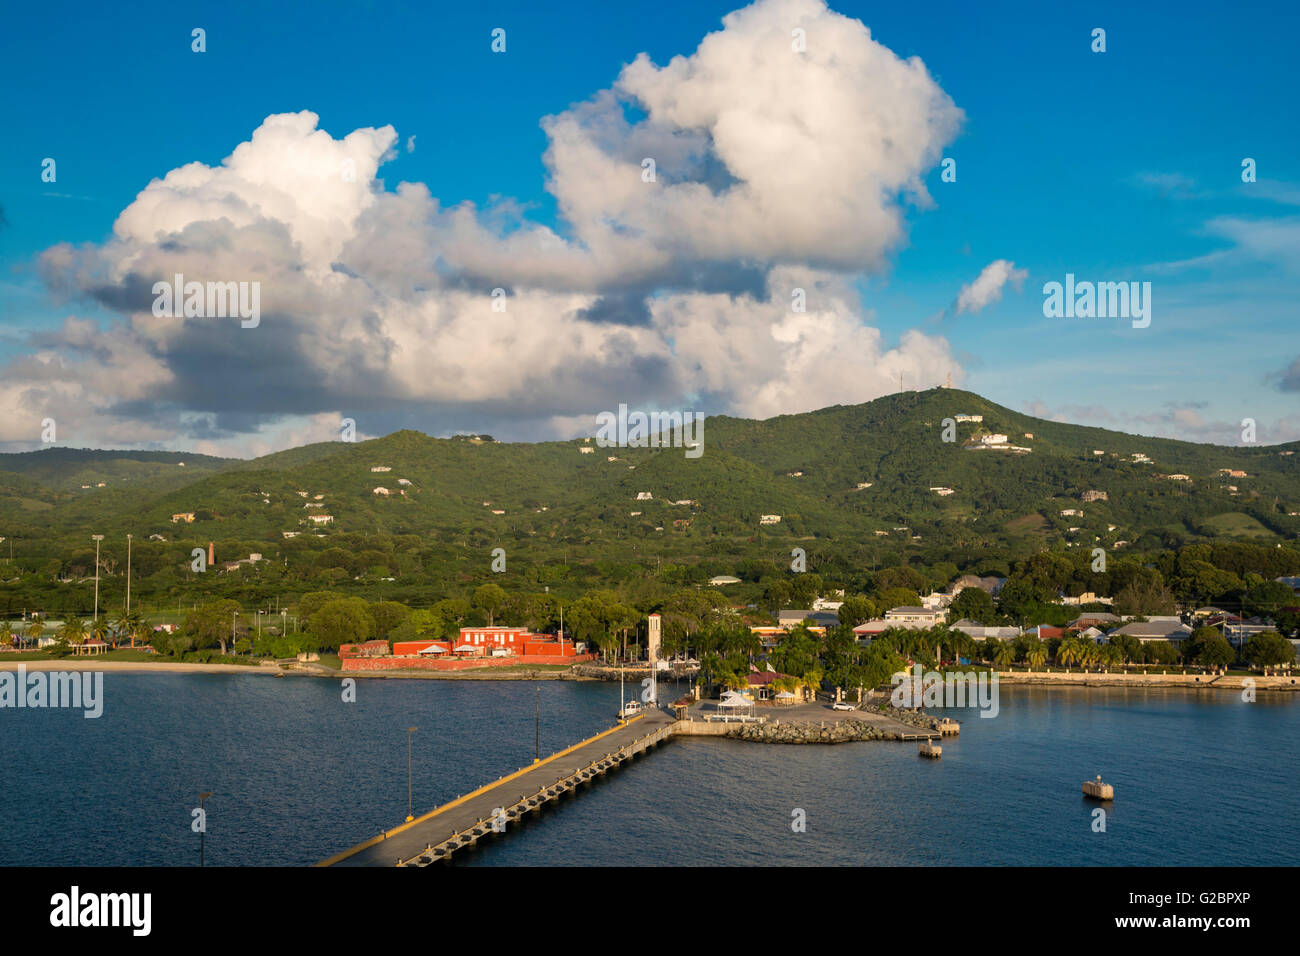 Dock and port area in Frederiksted, Saint Croix, US Virgin Islands Stock Photo